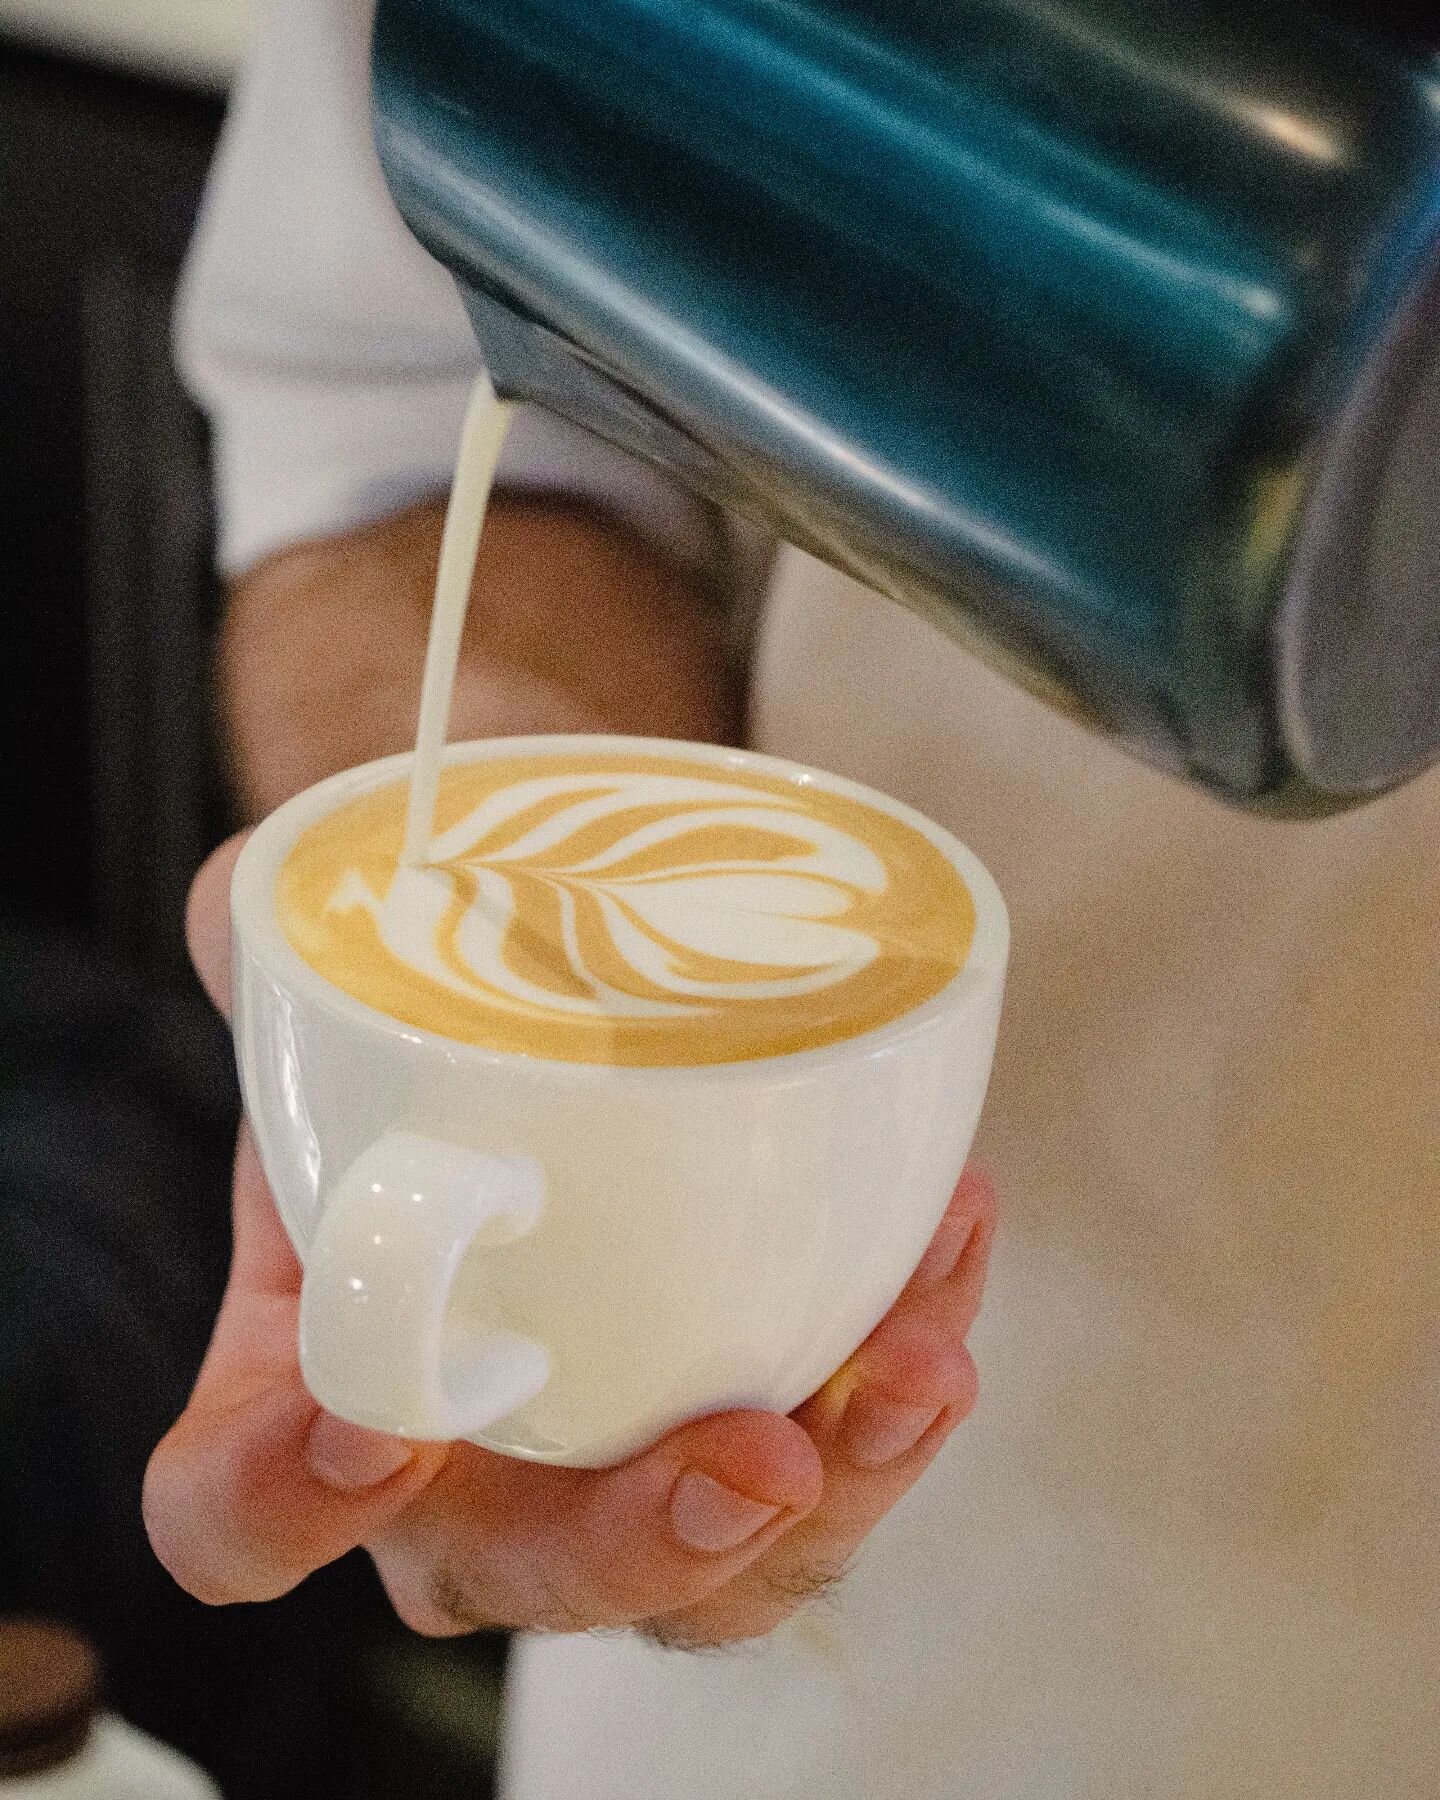 Silky flat whites this morning, serving up everyone's favorite Maple blend, with Aspen on rotation this week! ☕

Here till 2:30pm, you know the drill.